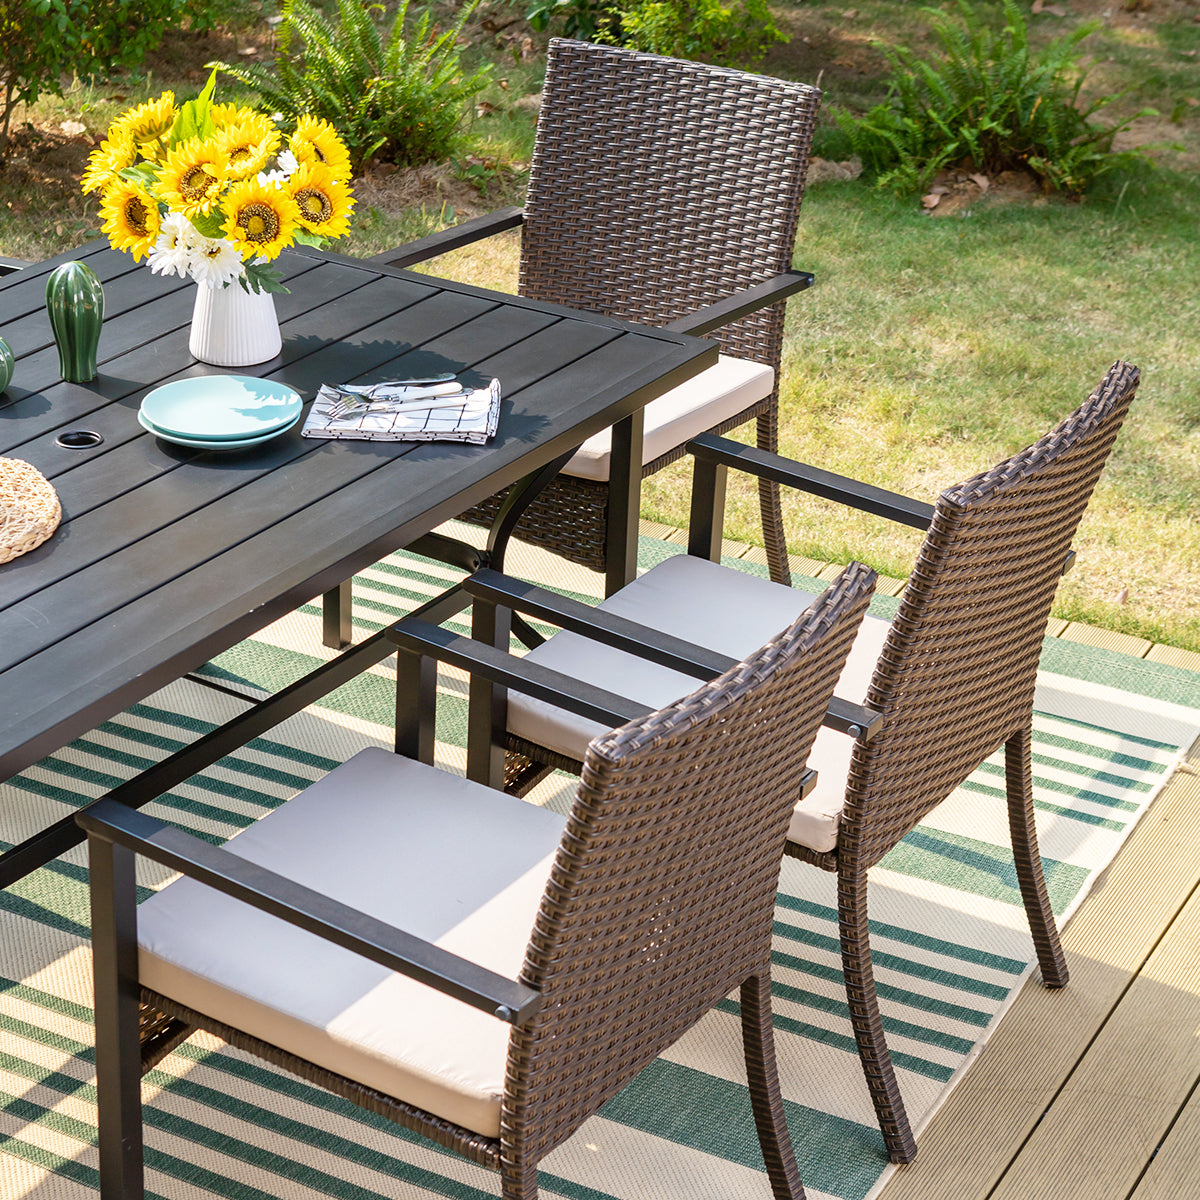 MFSTUDIO 7-Piece Steel Table & Rattan Cushion Dining Chairs Outdoor Patio Dining Set